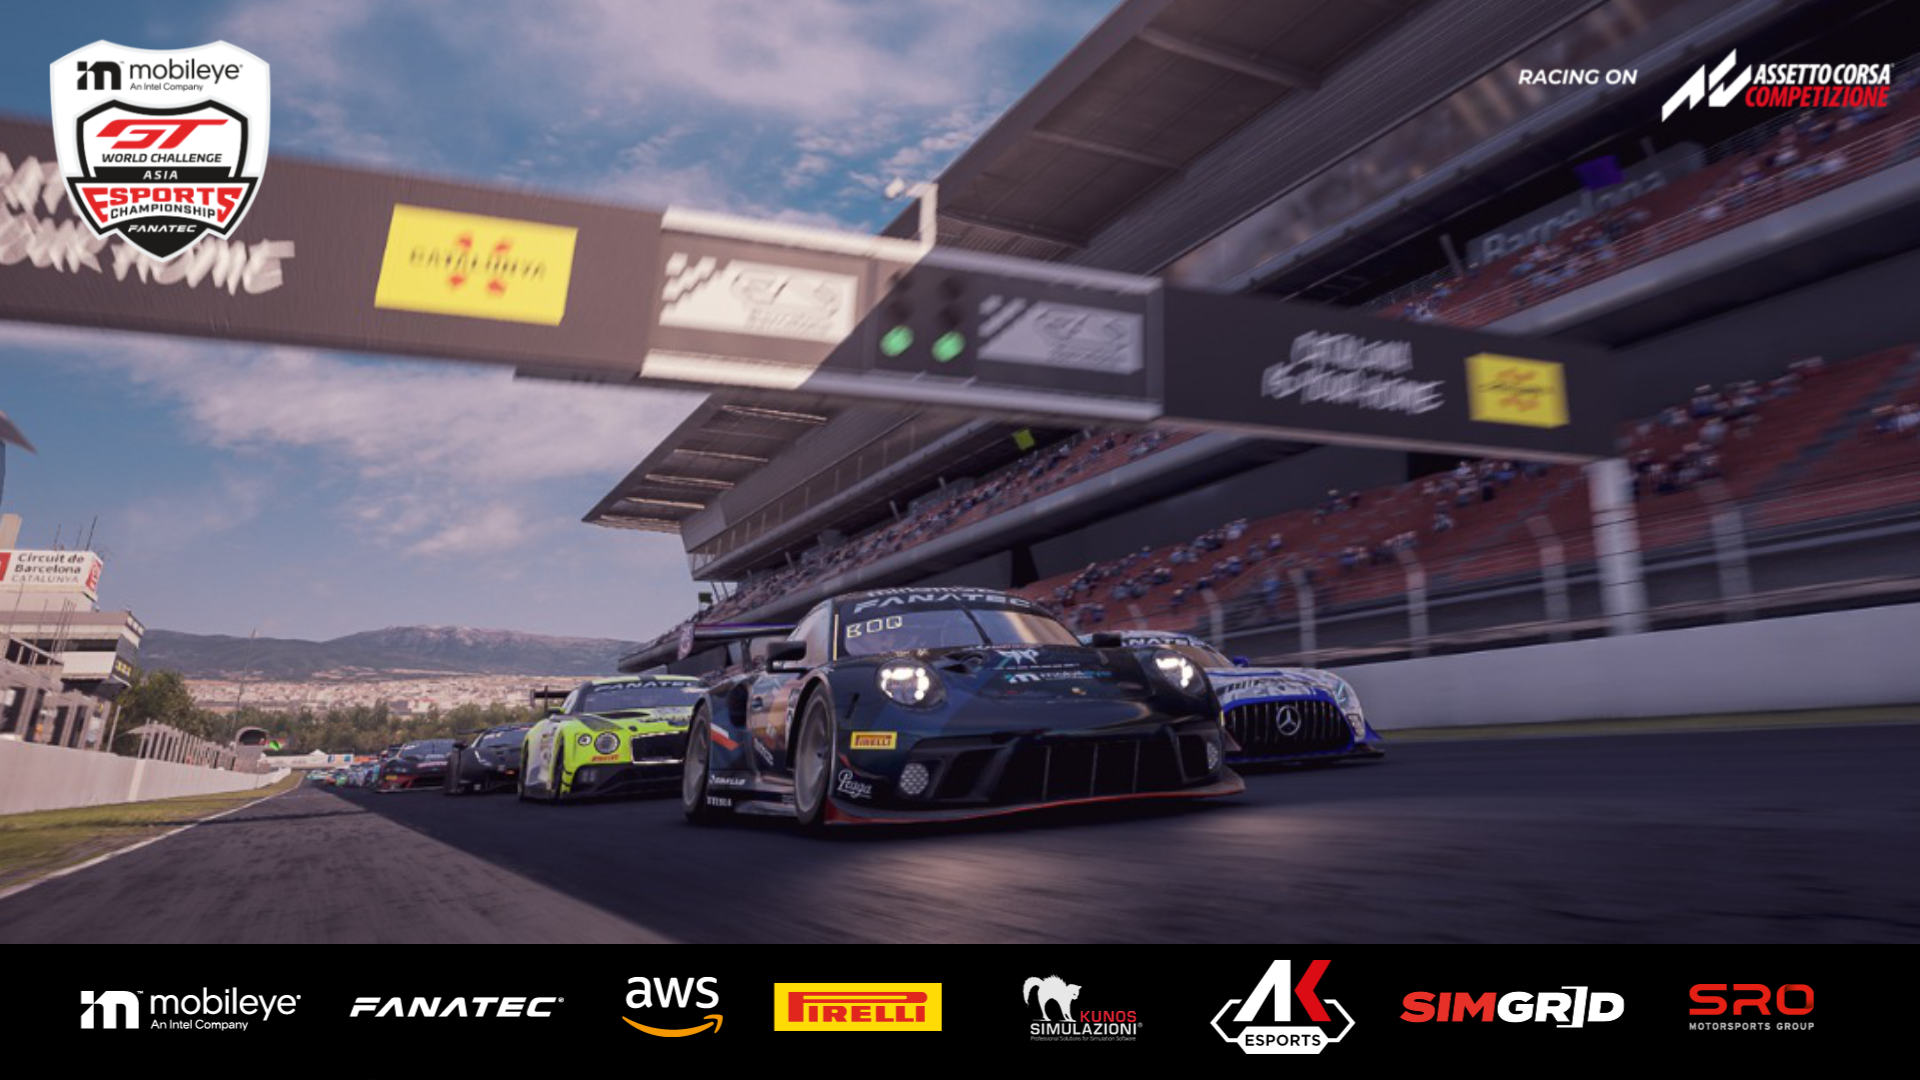 assetto corsa Free Download for pc